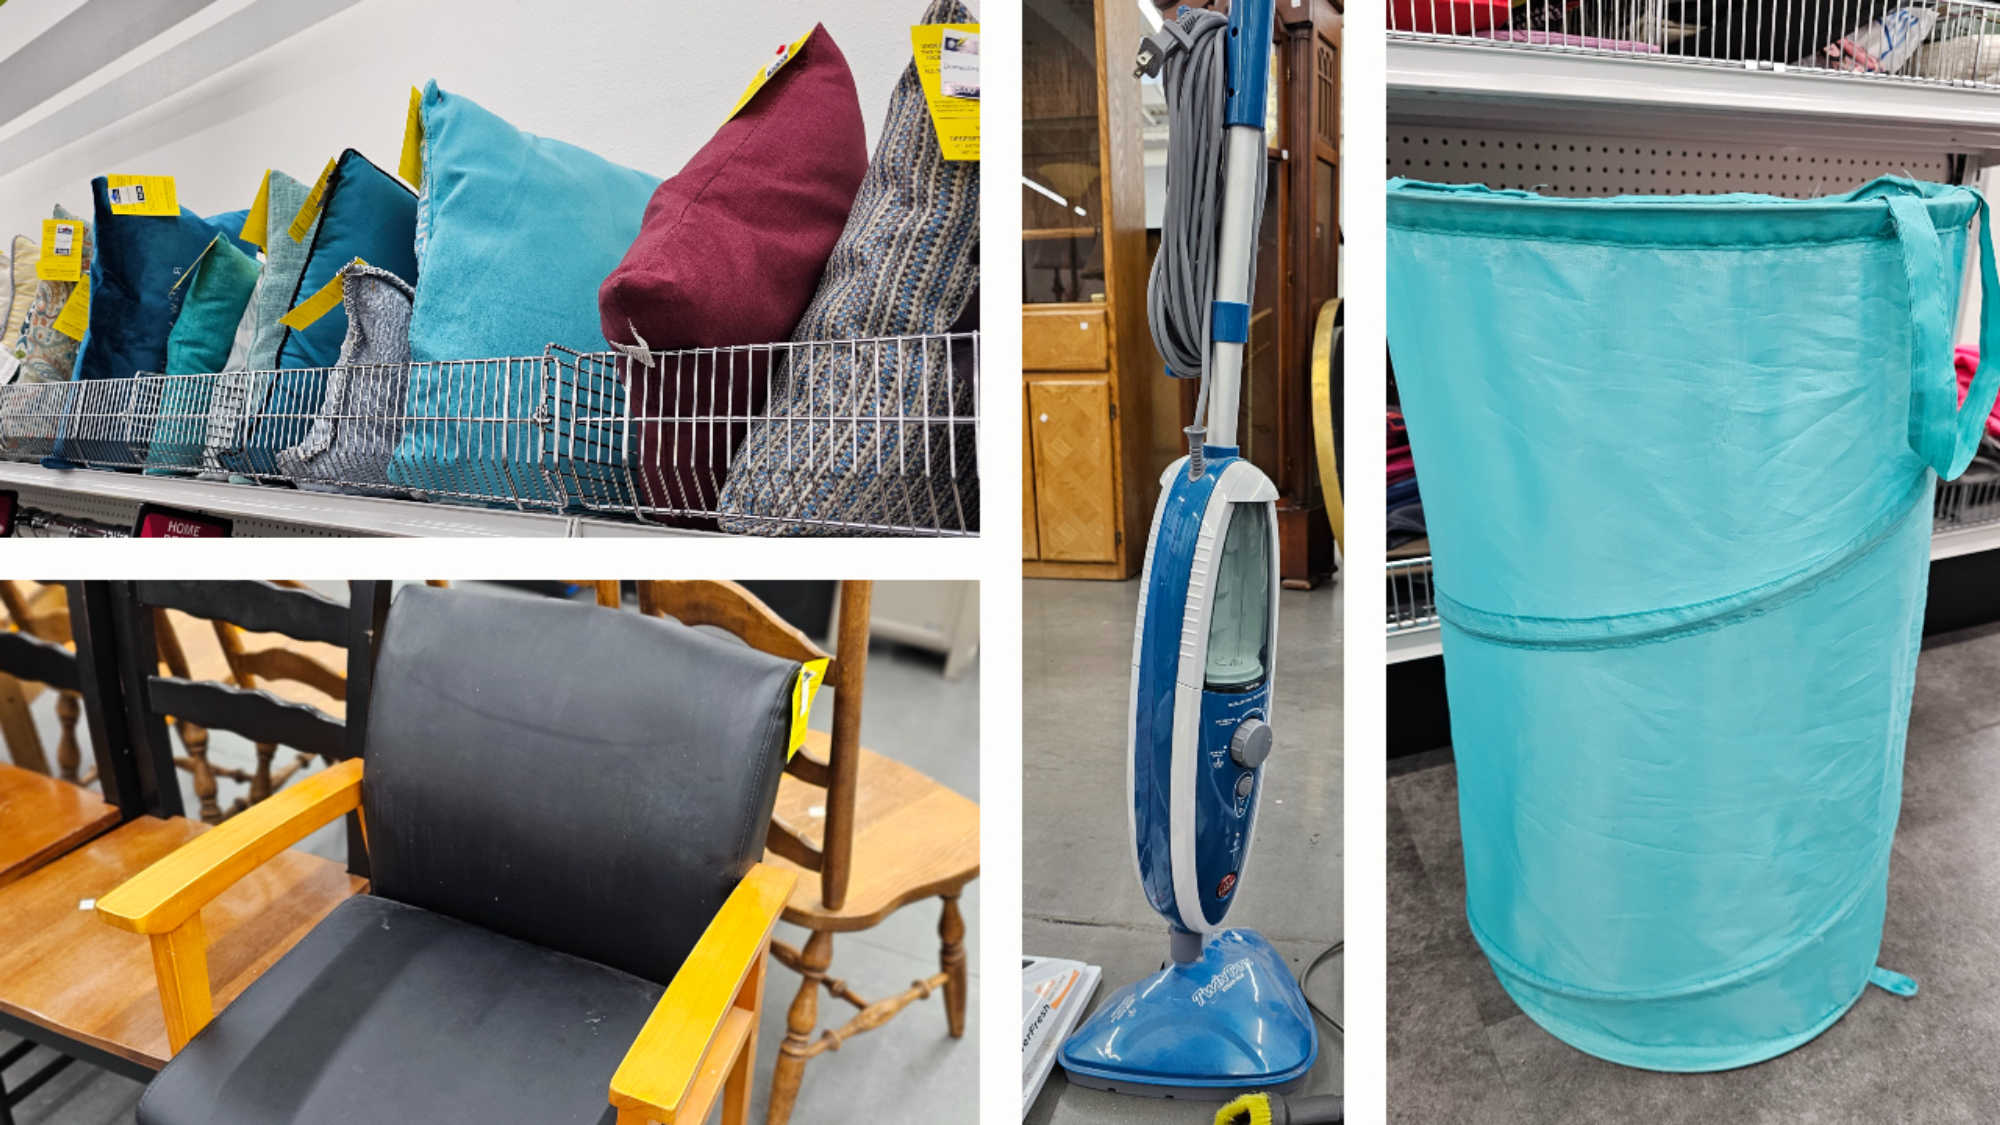 A collage of images showing dorm decor and supplies, including a shelf of decorative pillows, a desk chair, a secondhand vacuum, and a collapsible laundry basket.